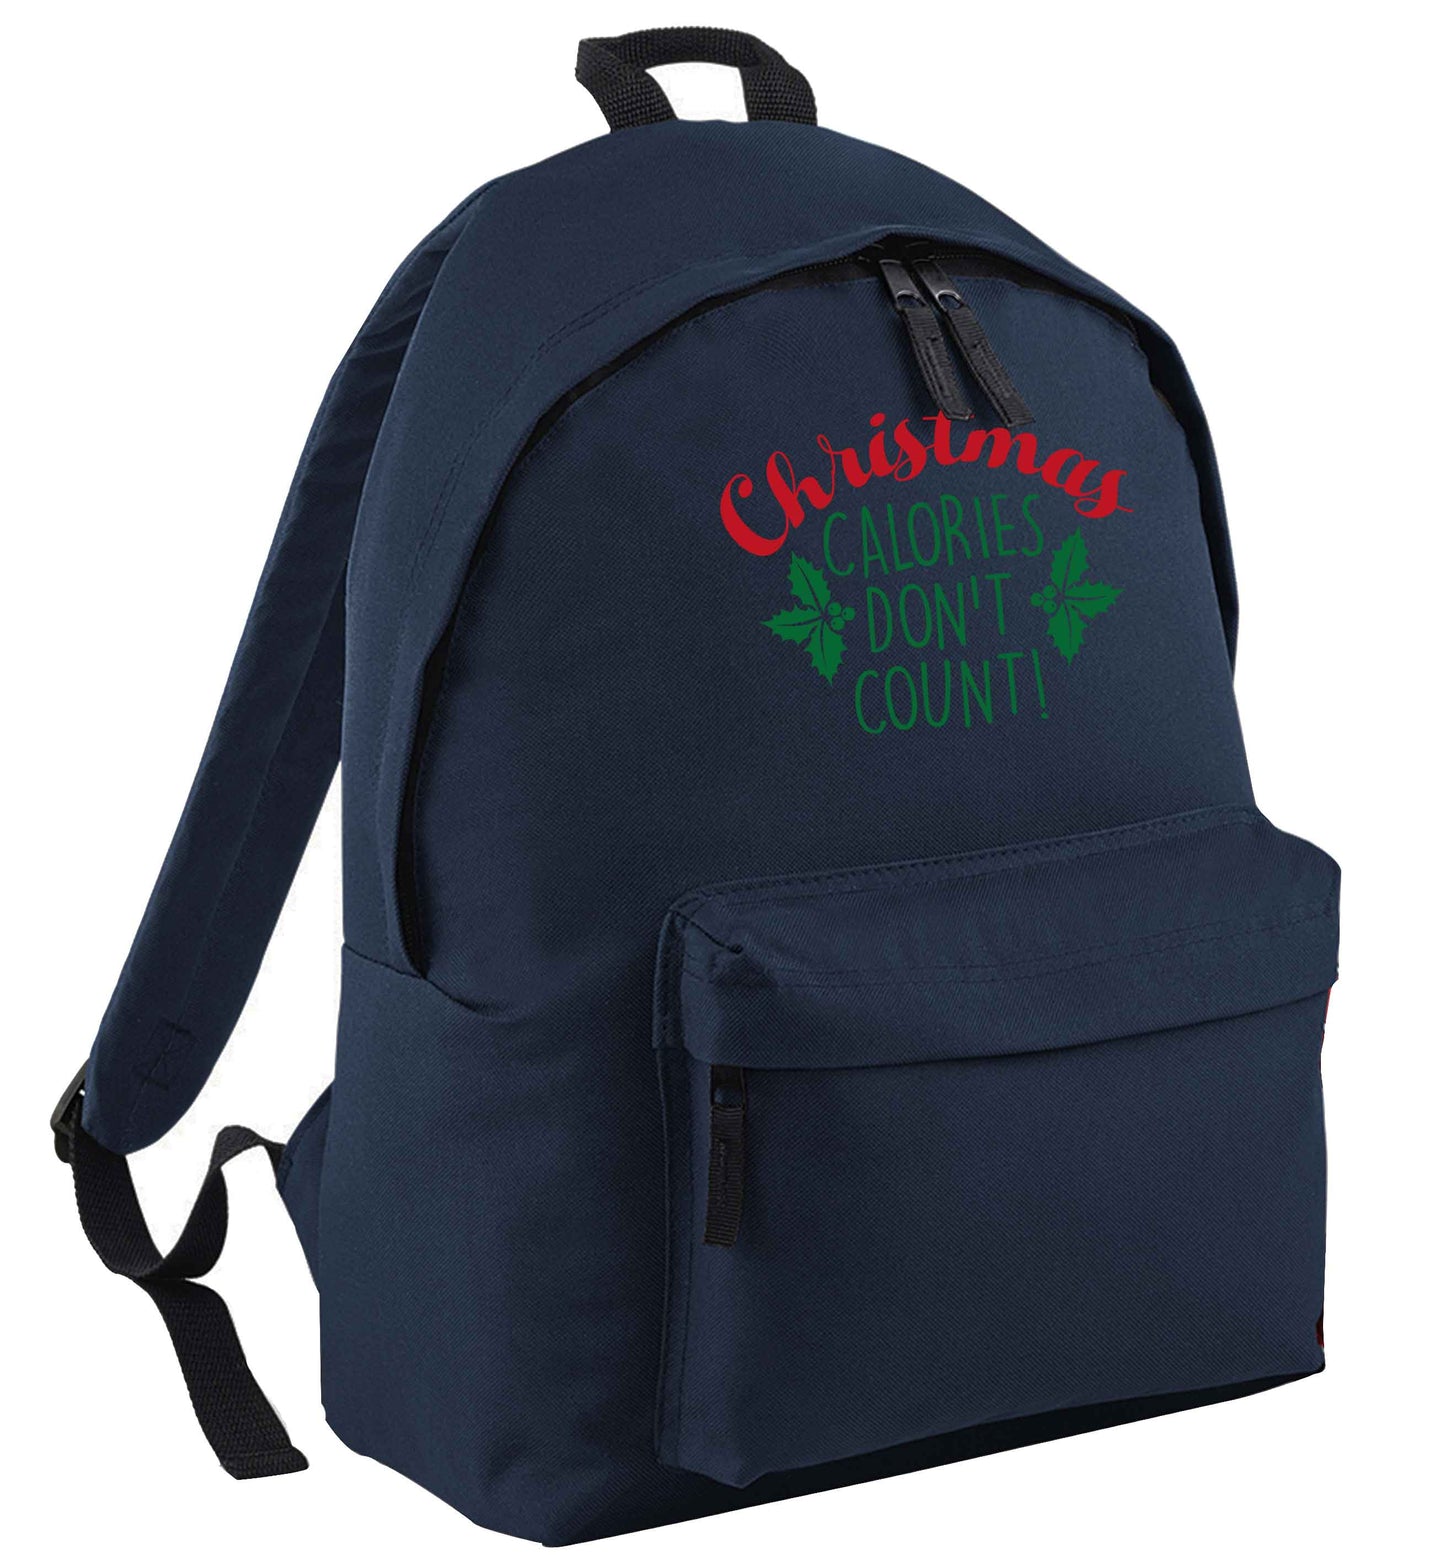 Christmas calories don't count navy adults backpack